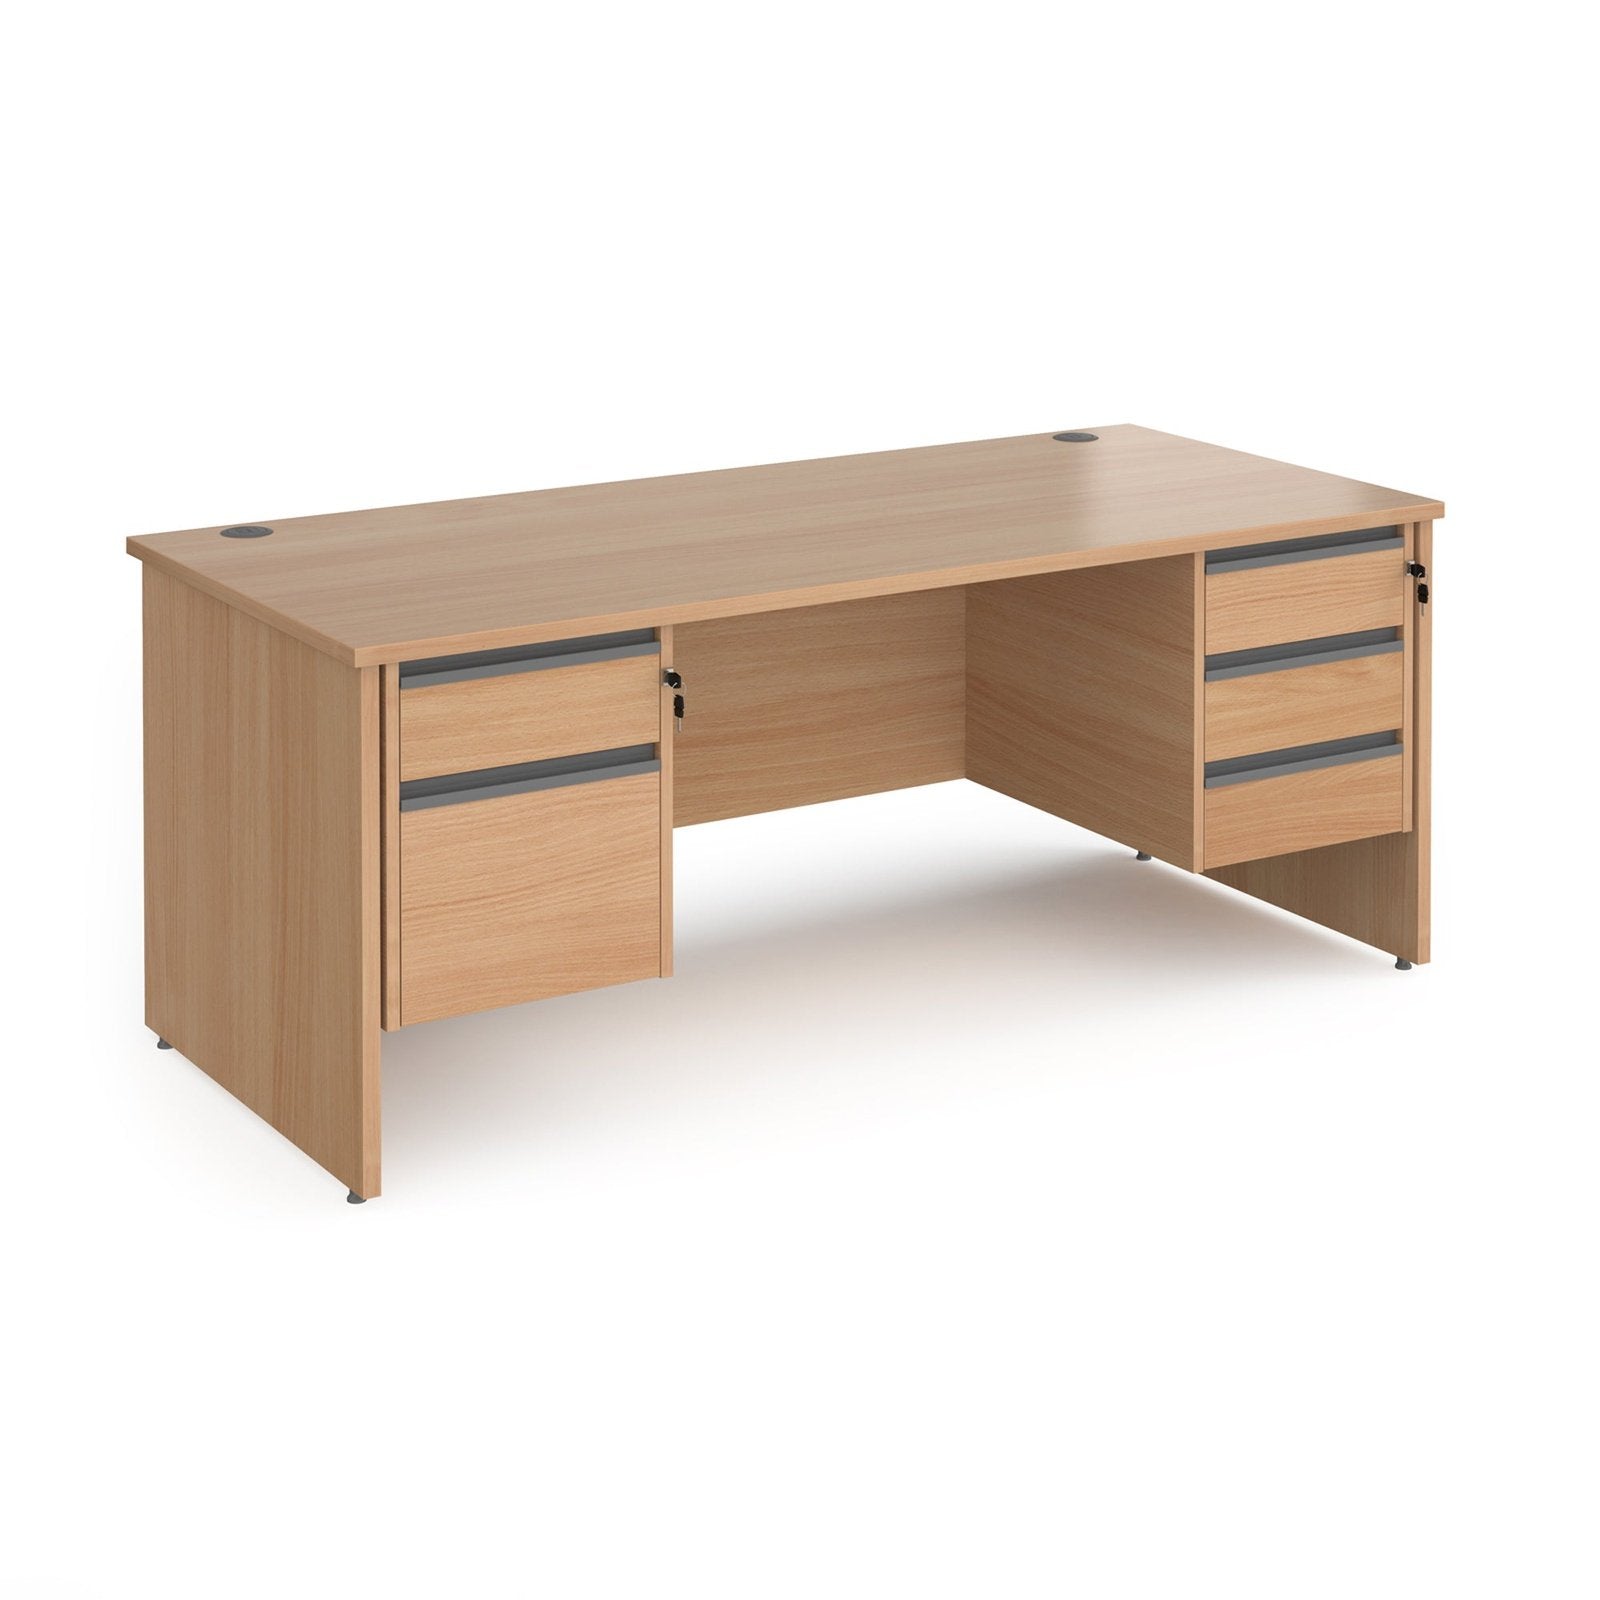 Contract 25 straight desk with 2 3 drawer pedestals and panel leg - Office Products Online